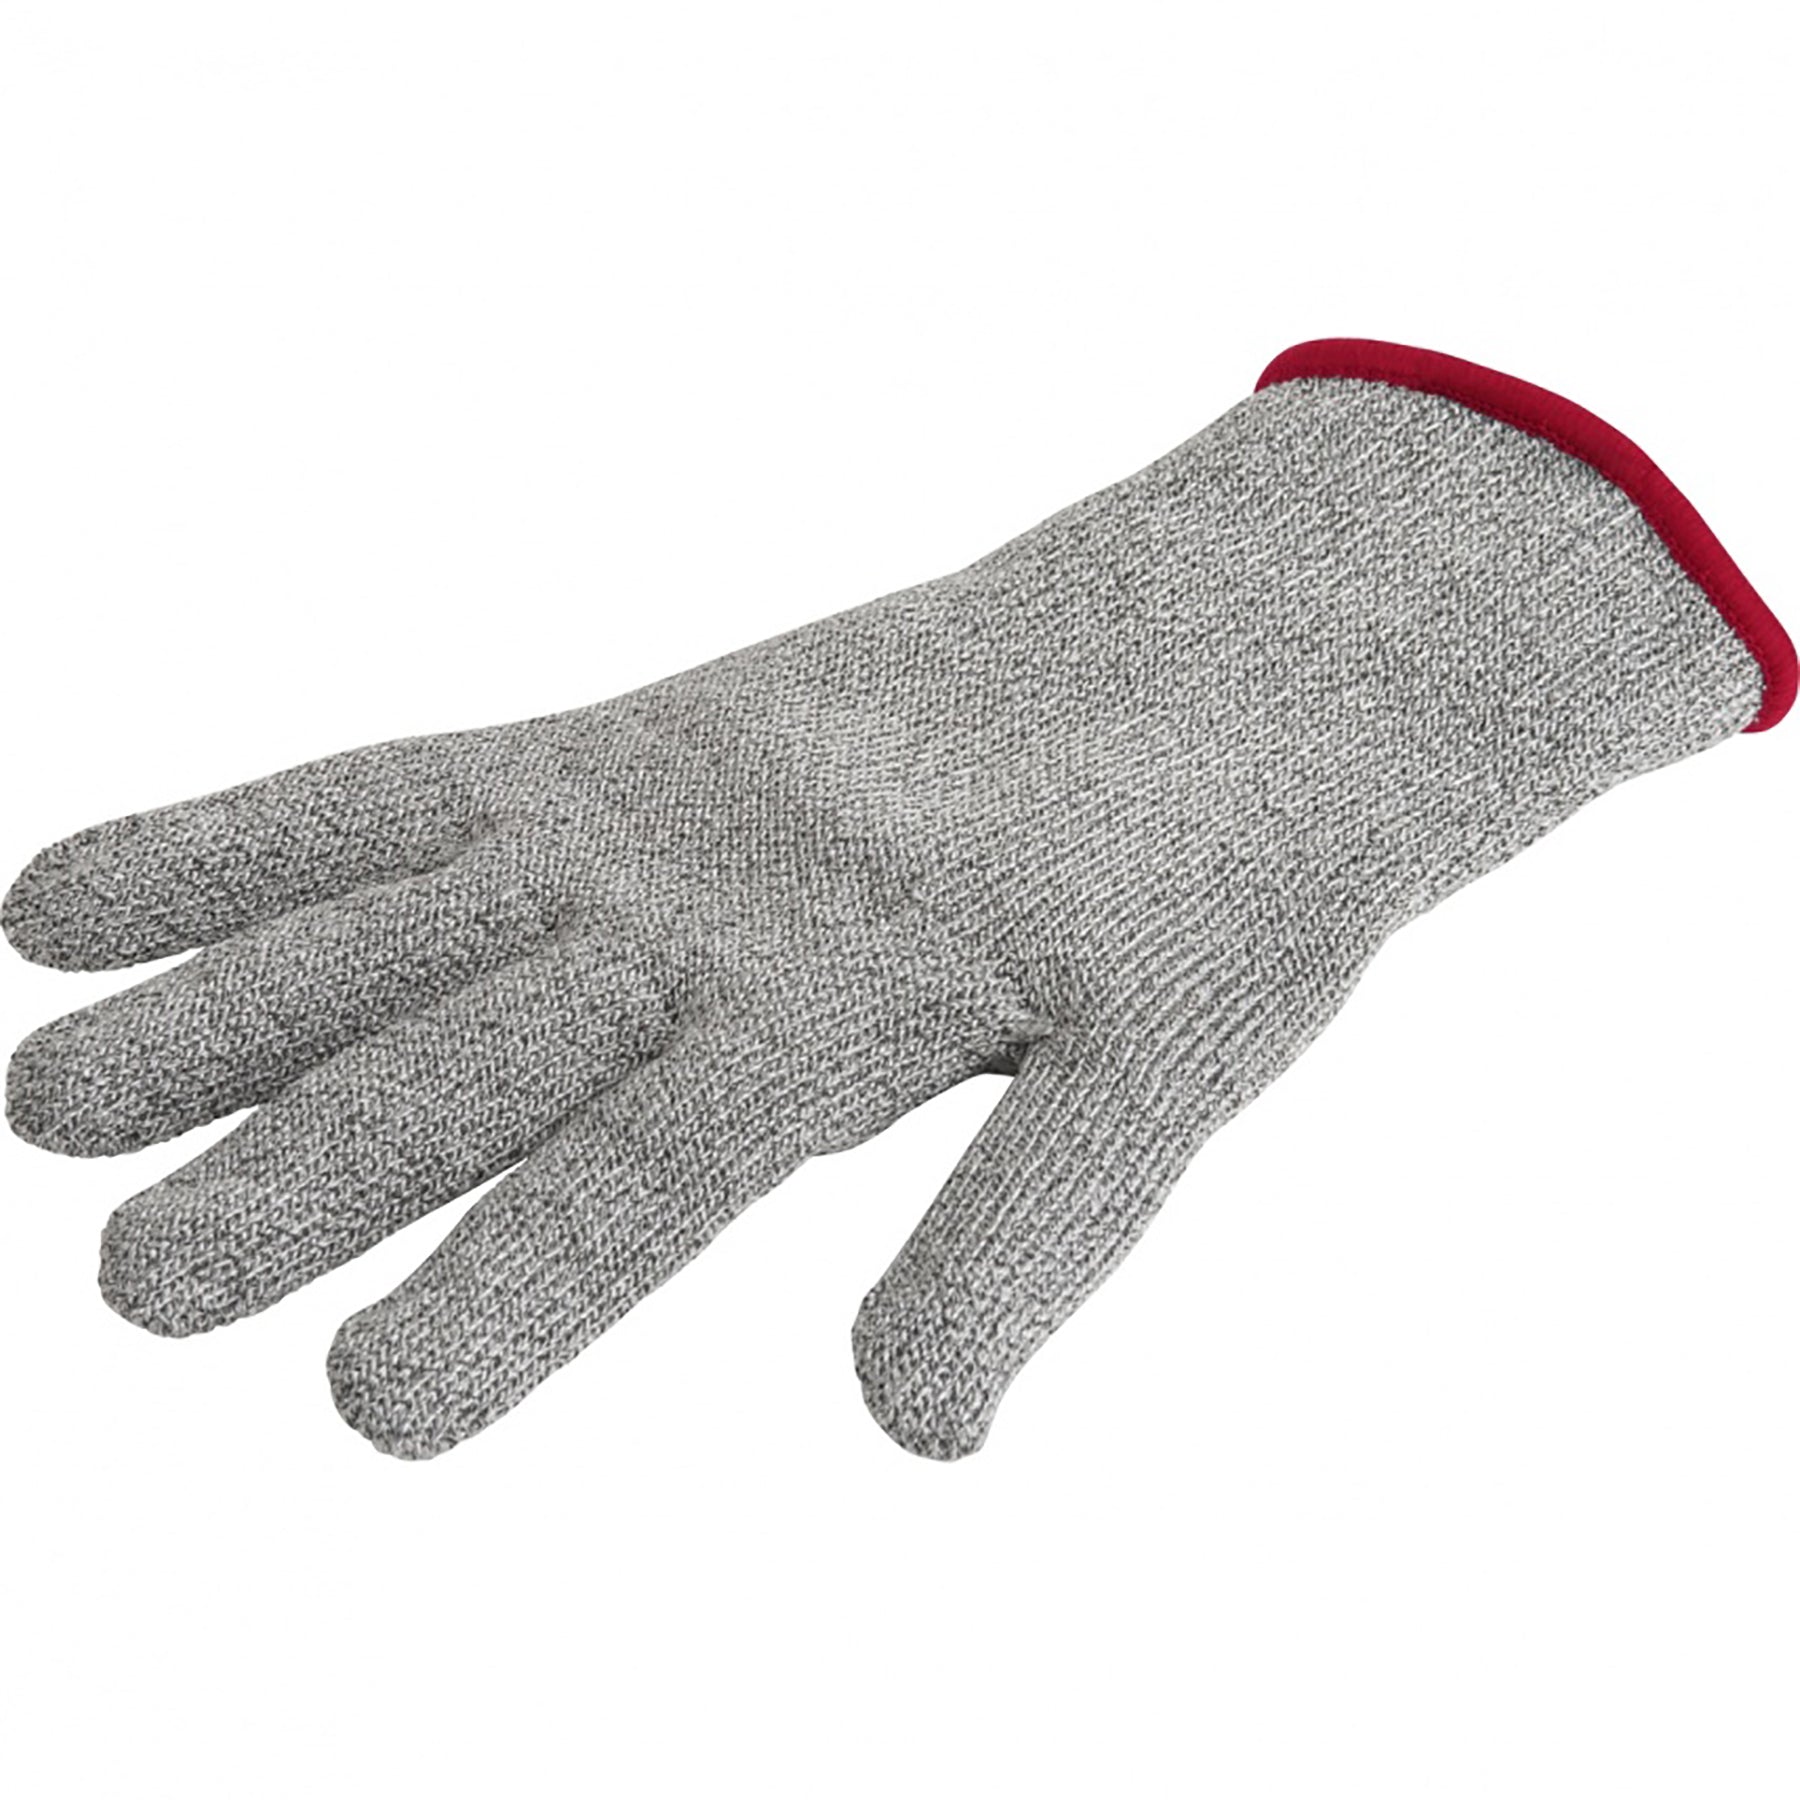 Trudeau Cut Resistant Glove - Stainless Steel Reinforced - One Size